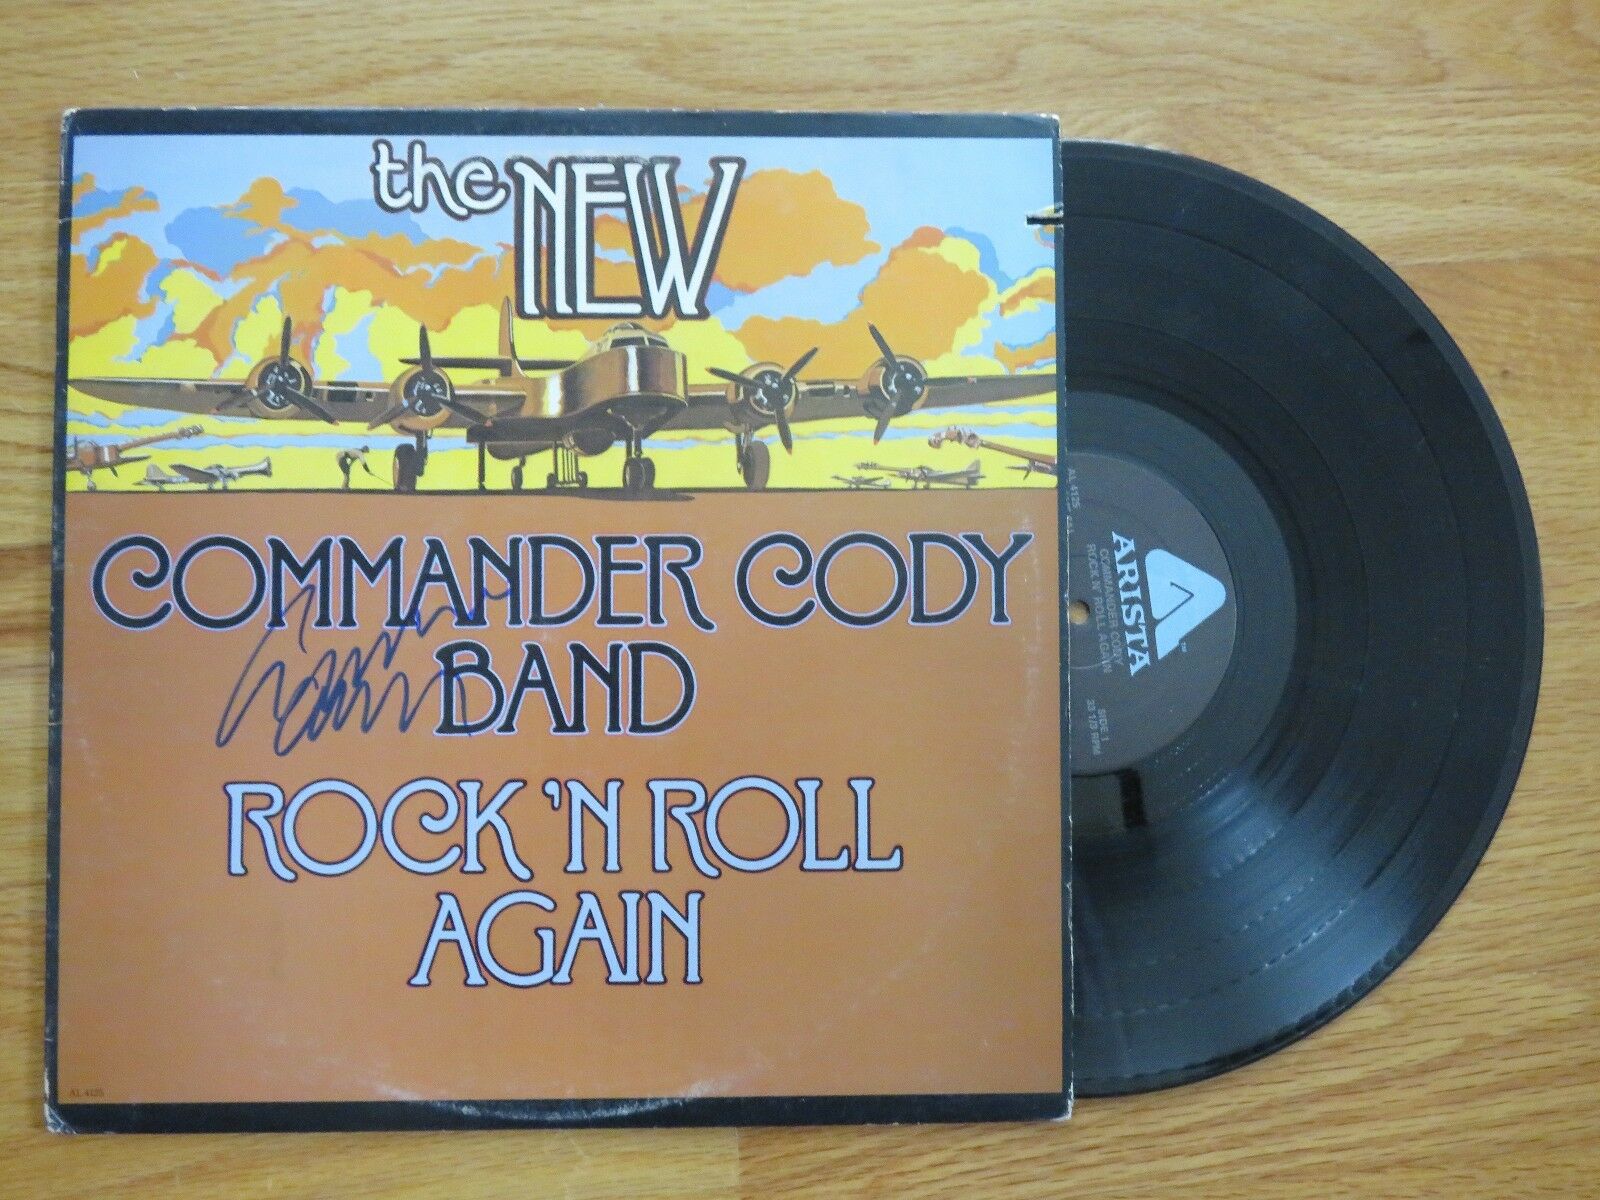 COMMANDER CODY & His LOST PLANET AIRMEN signed 1977 ROCK 'N ROLL AGAIN Record